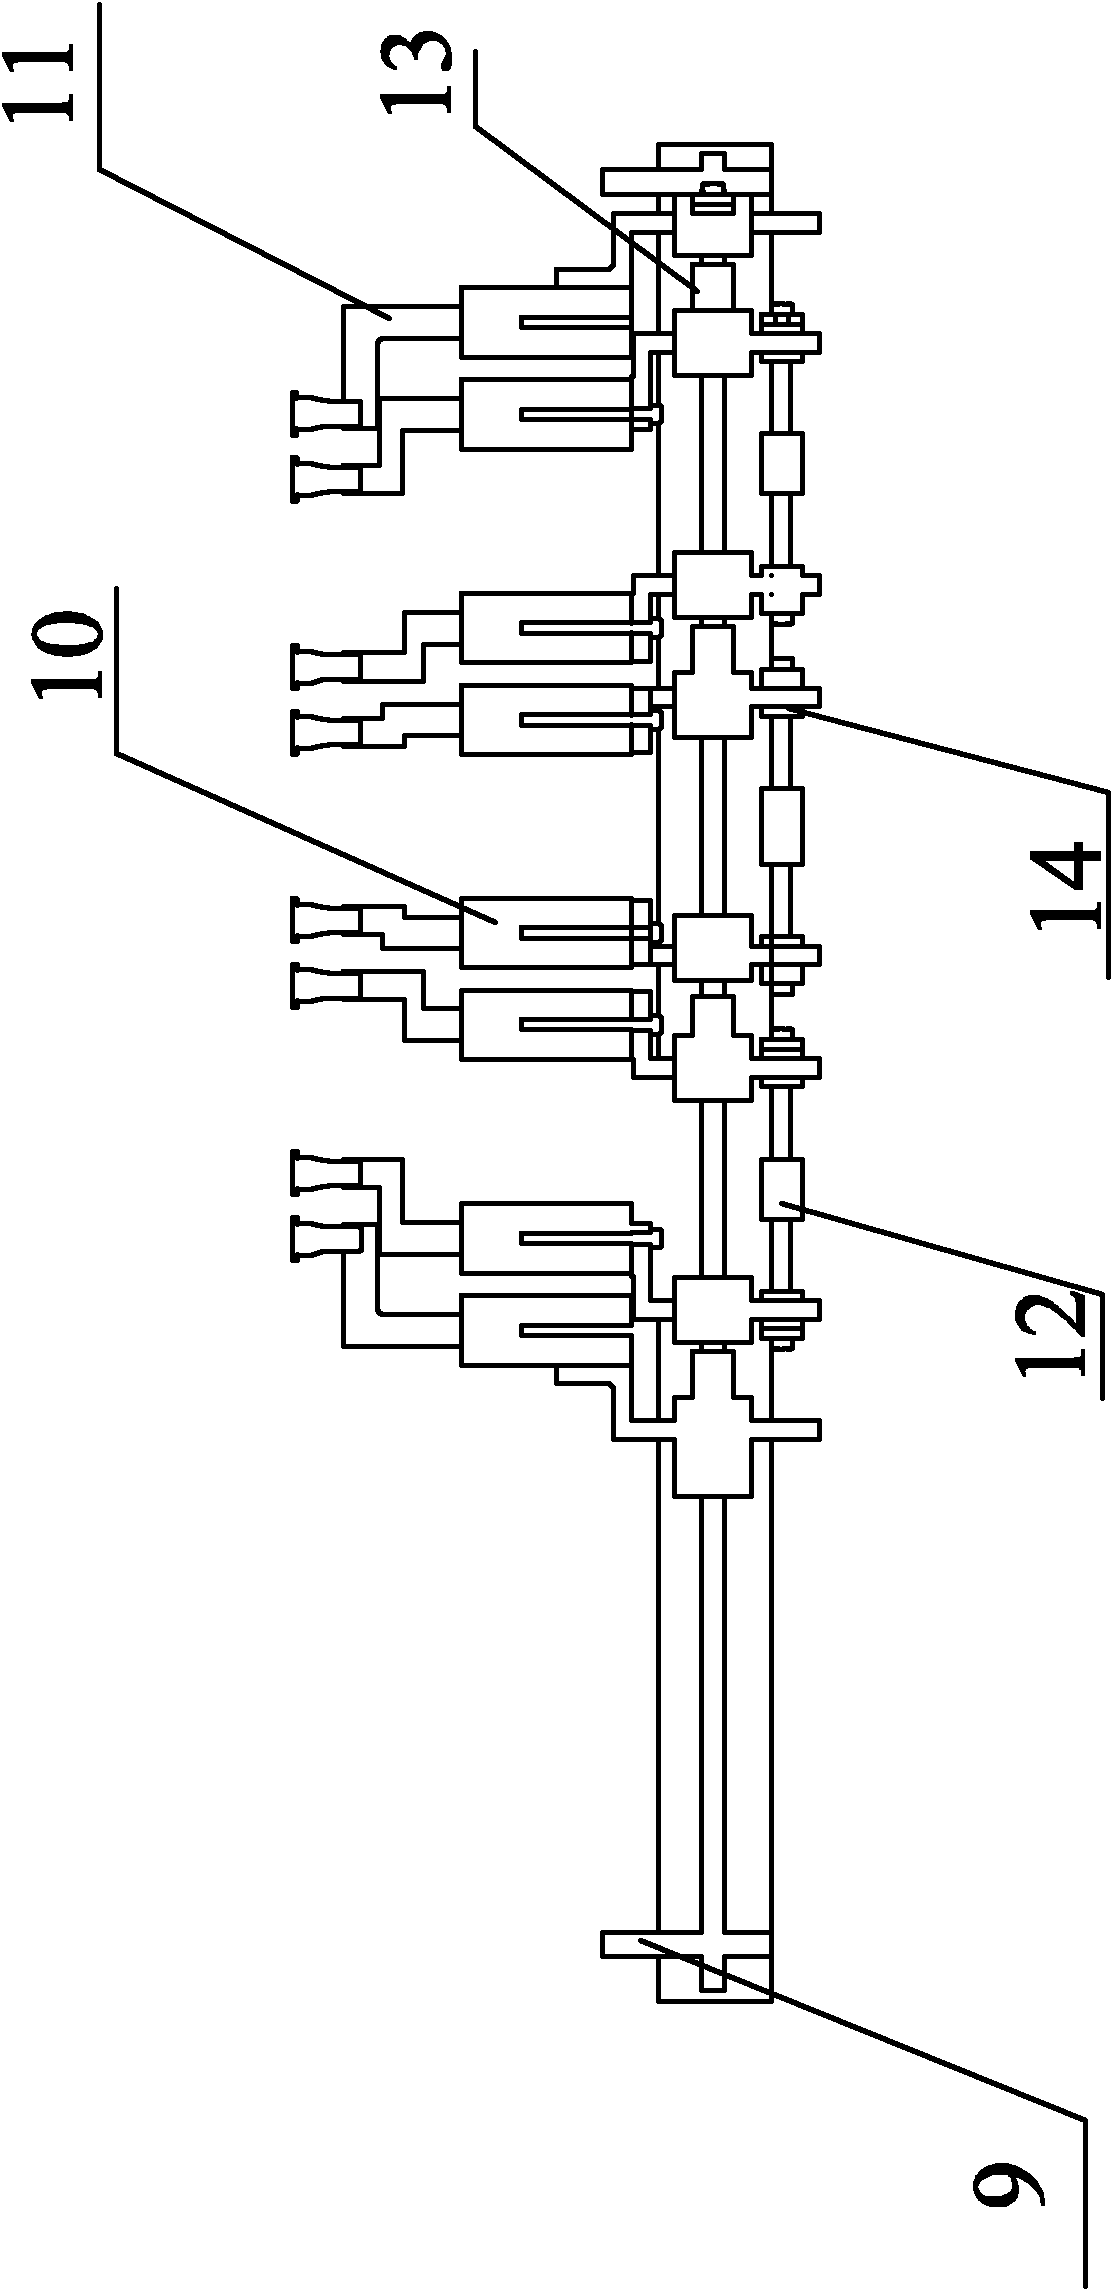 T-shaped interface supply device for non-polyvinyl chloride (PVC) soft bag large transfusion production line